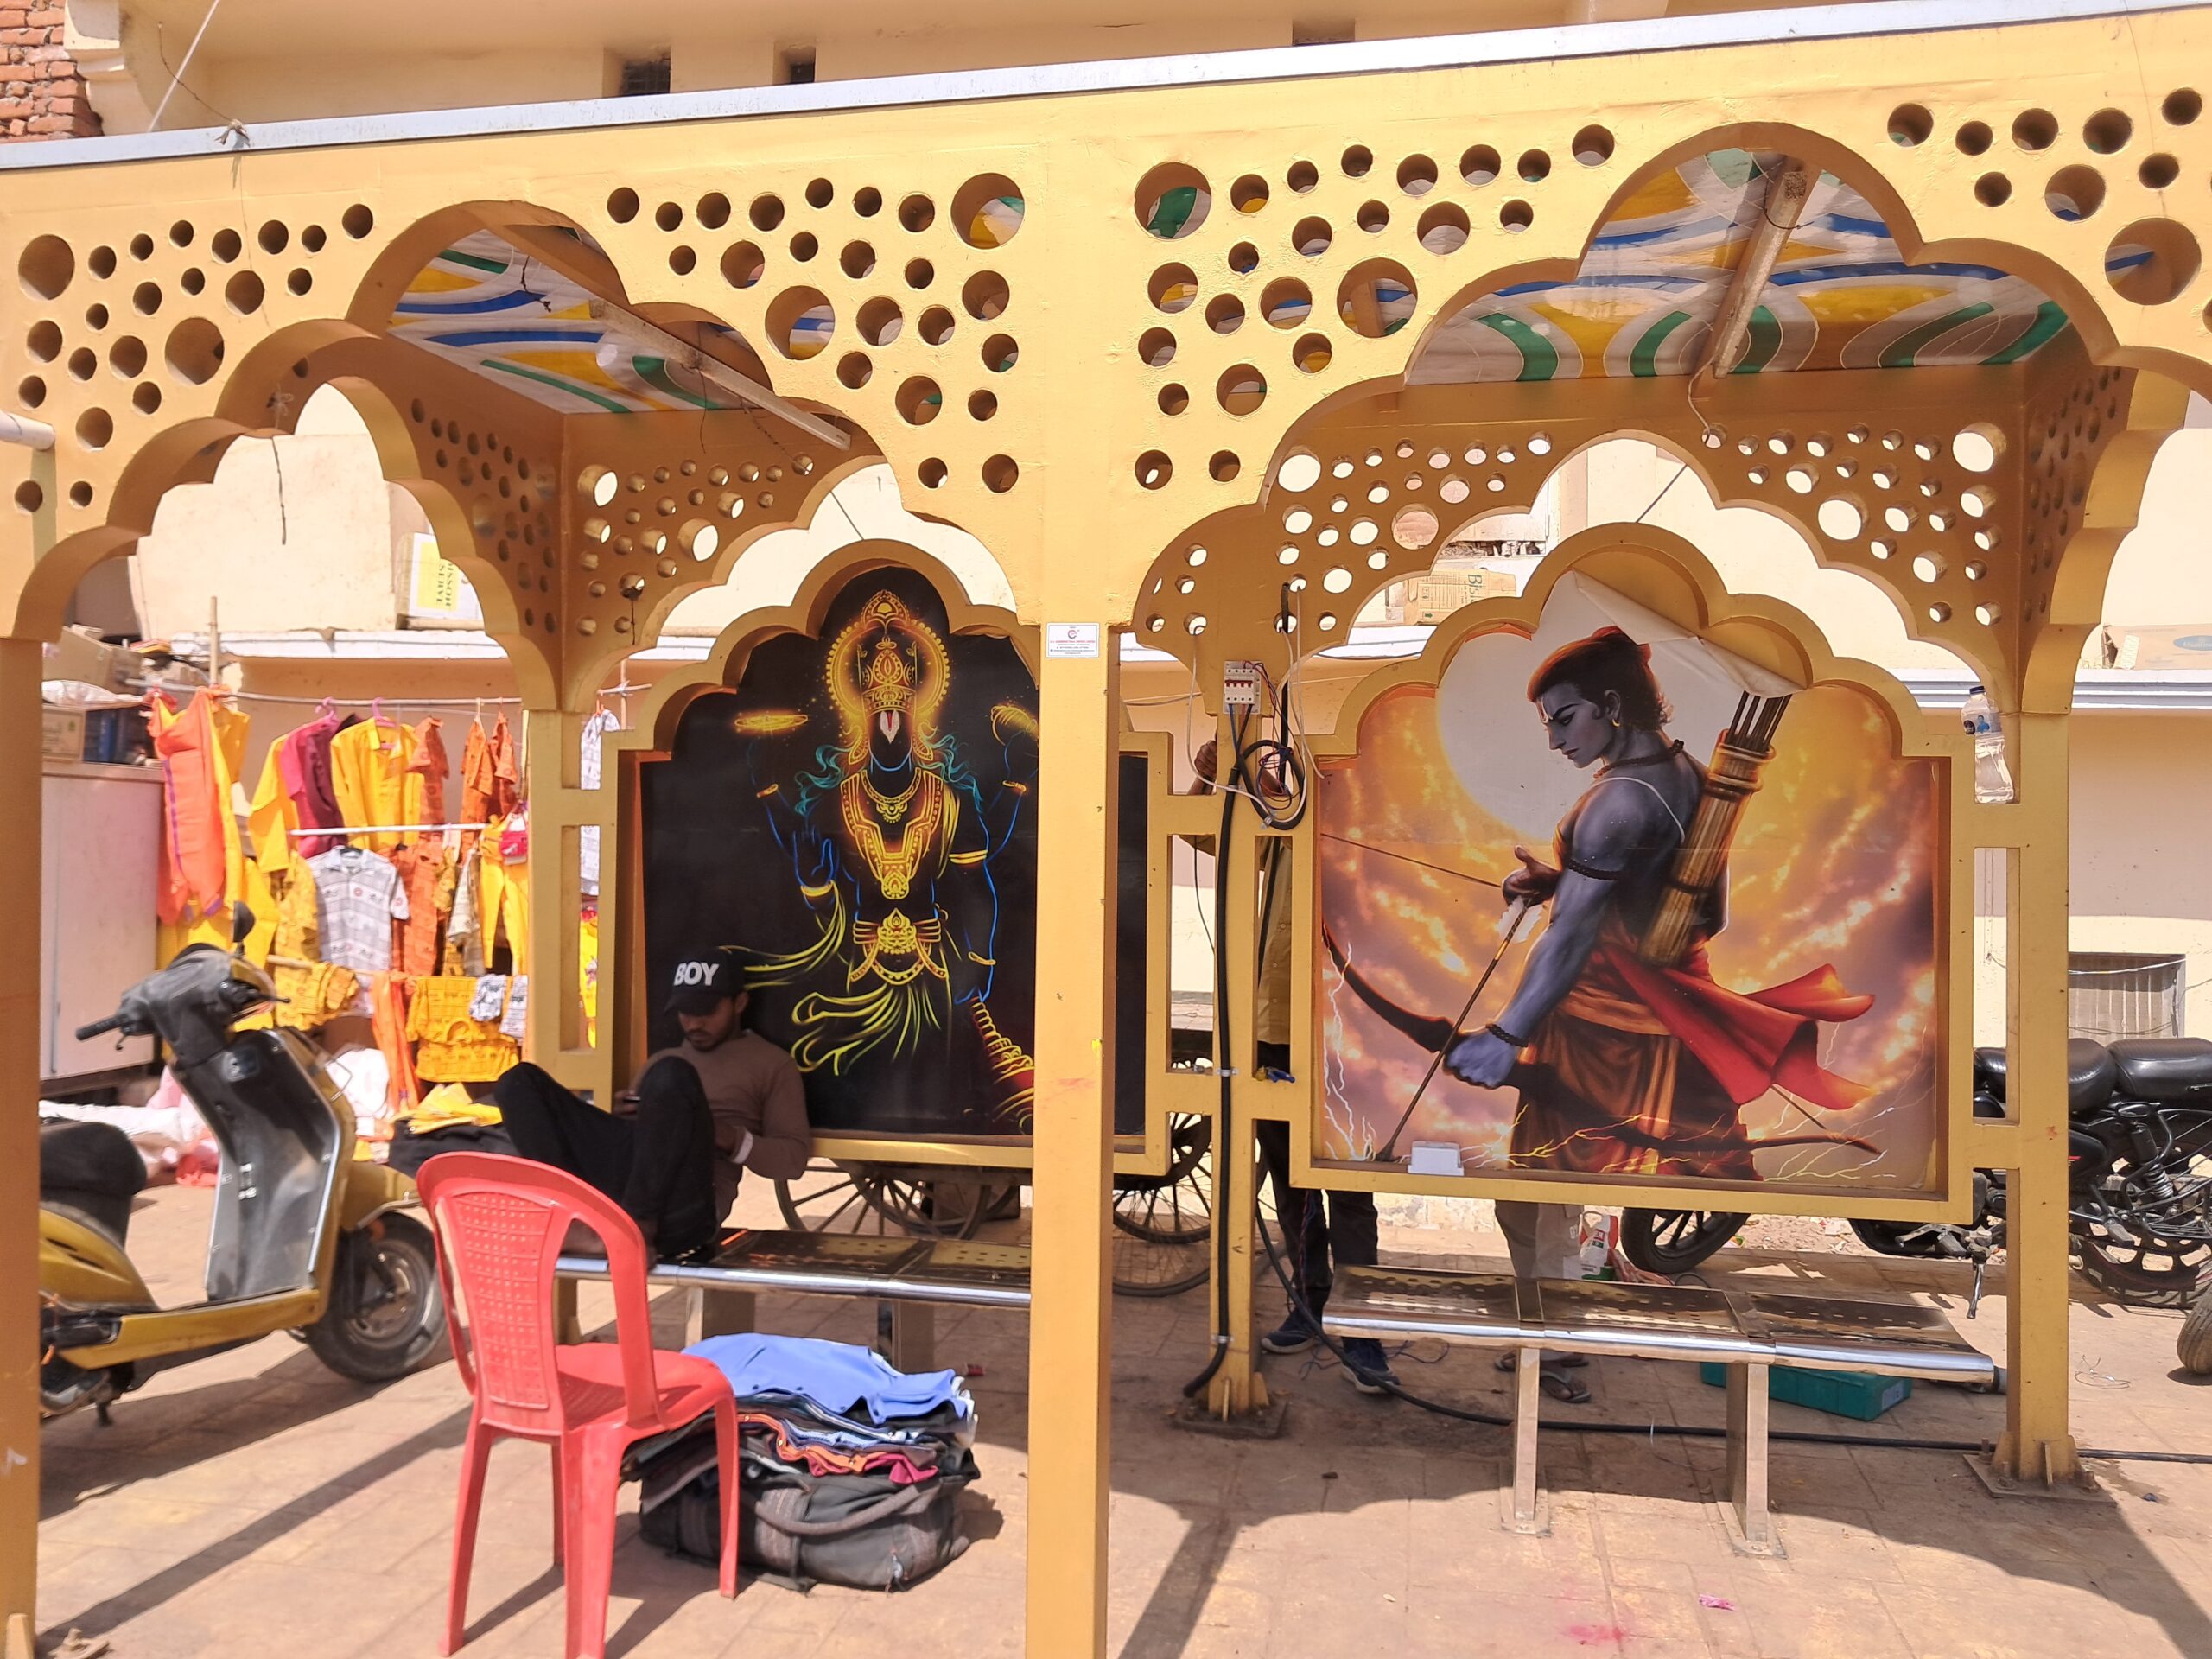 Bus stops all adorned with Shri Ram Images at Ayodhya